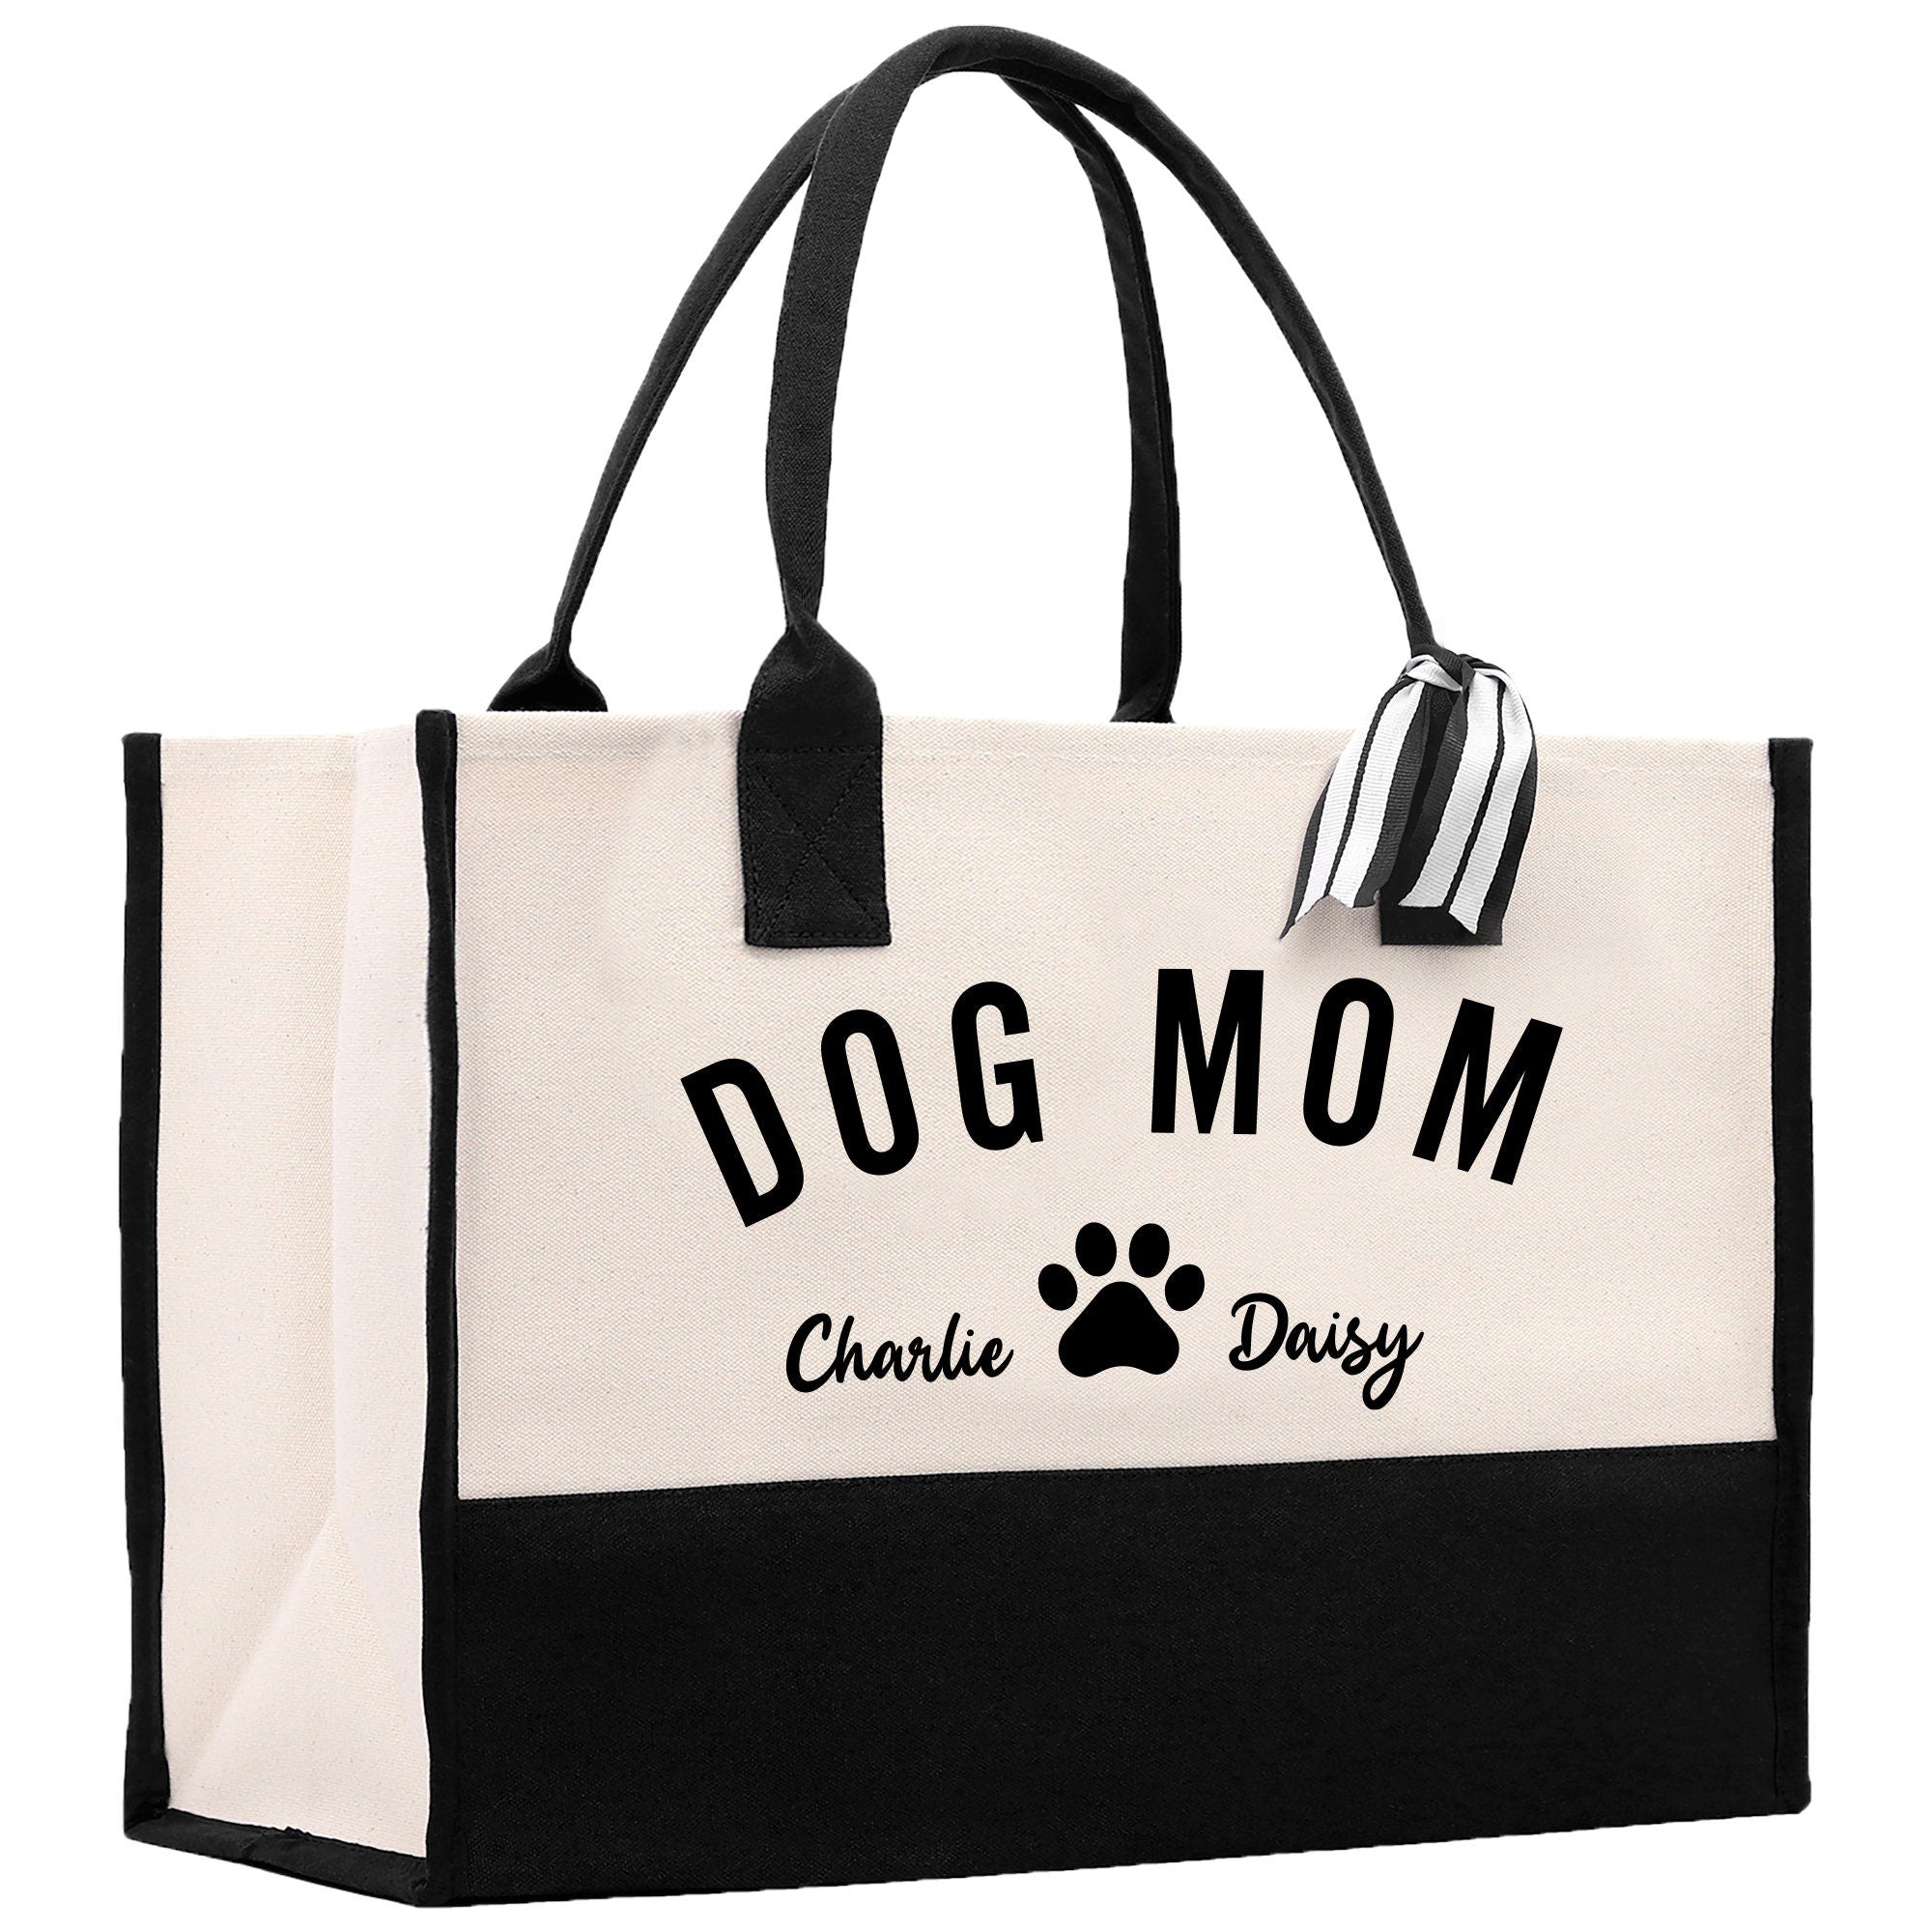 a black and white bag with a dog mom on it